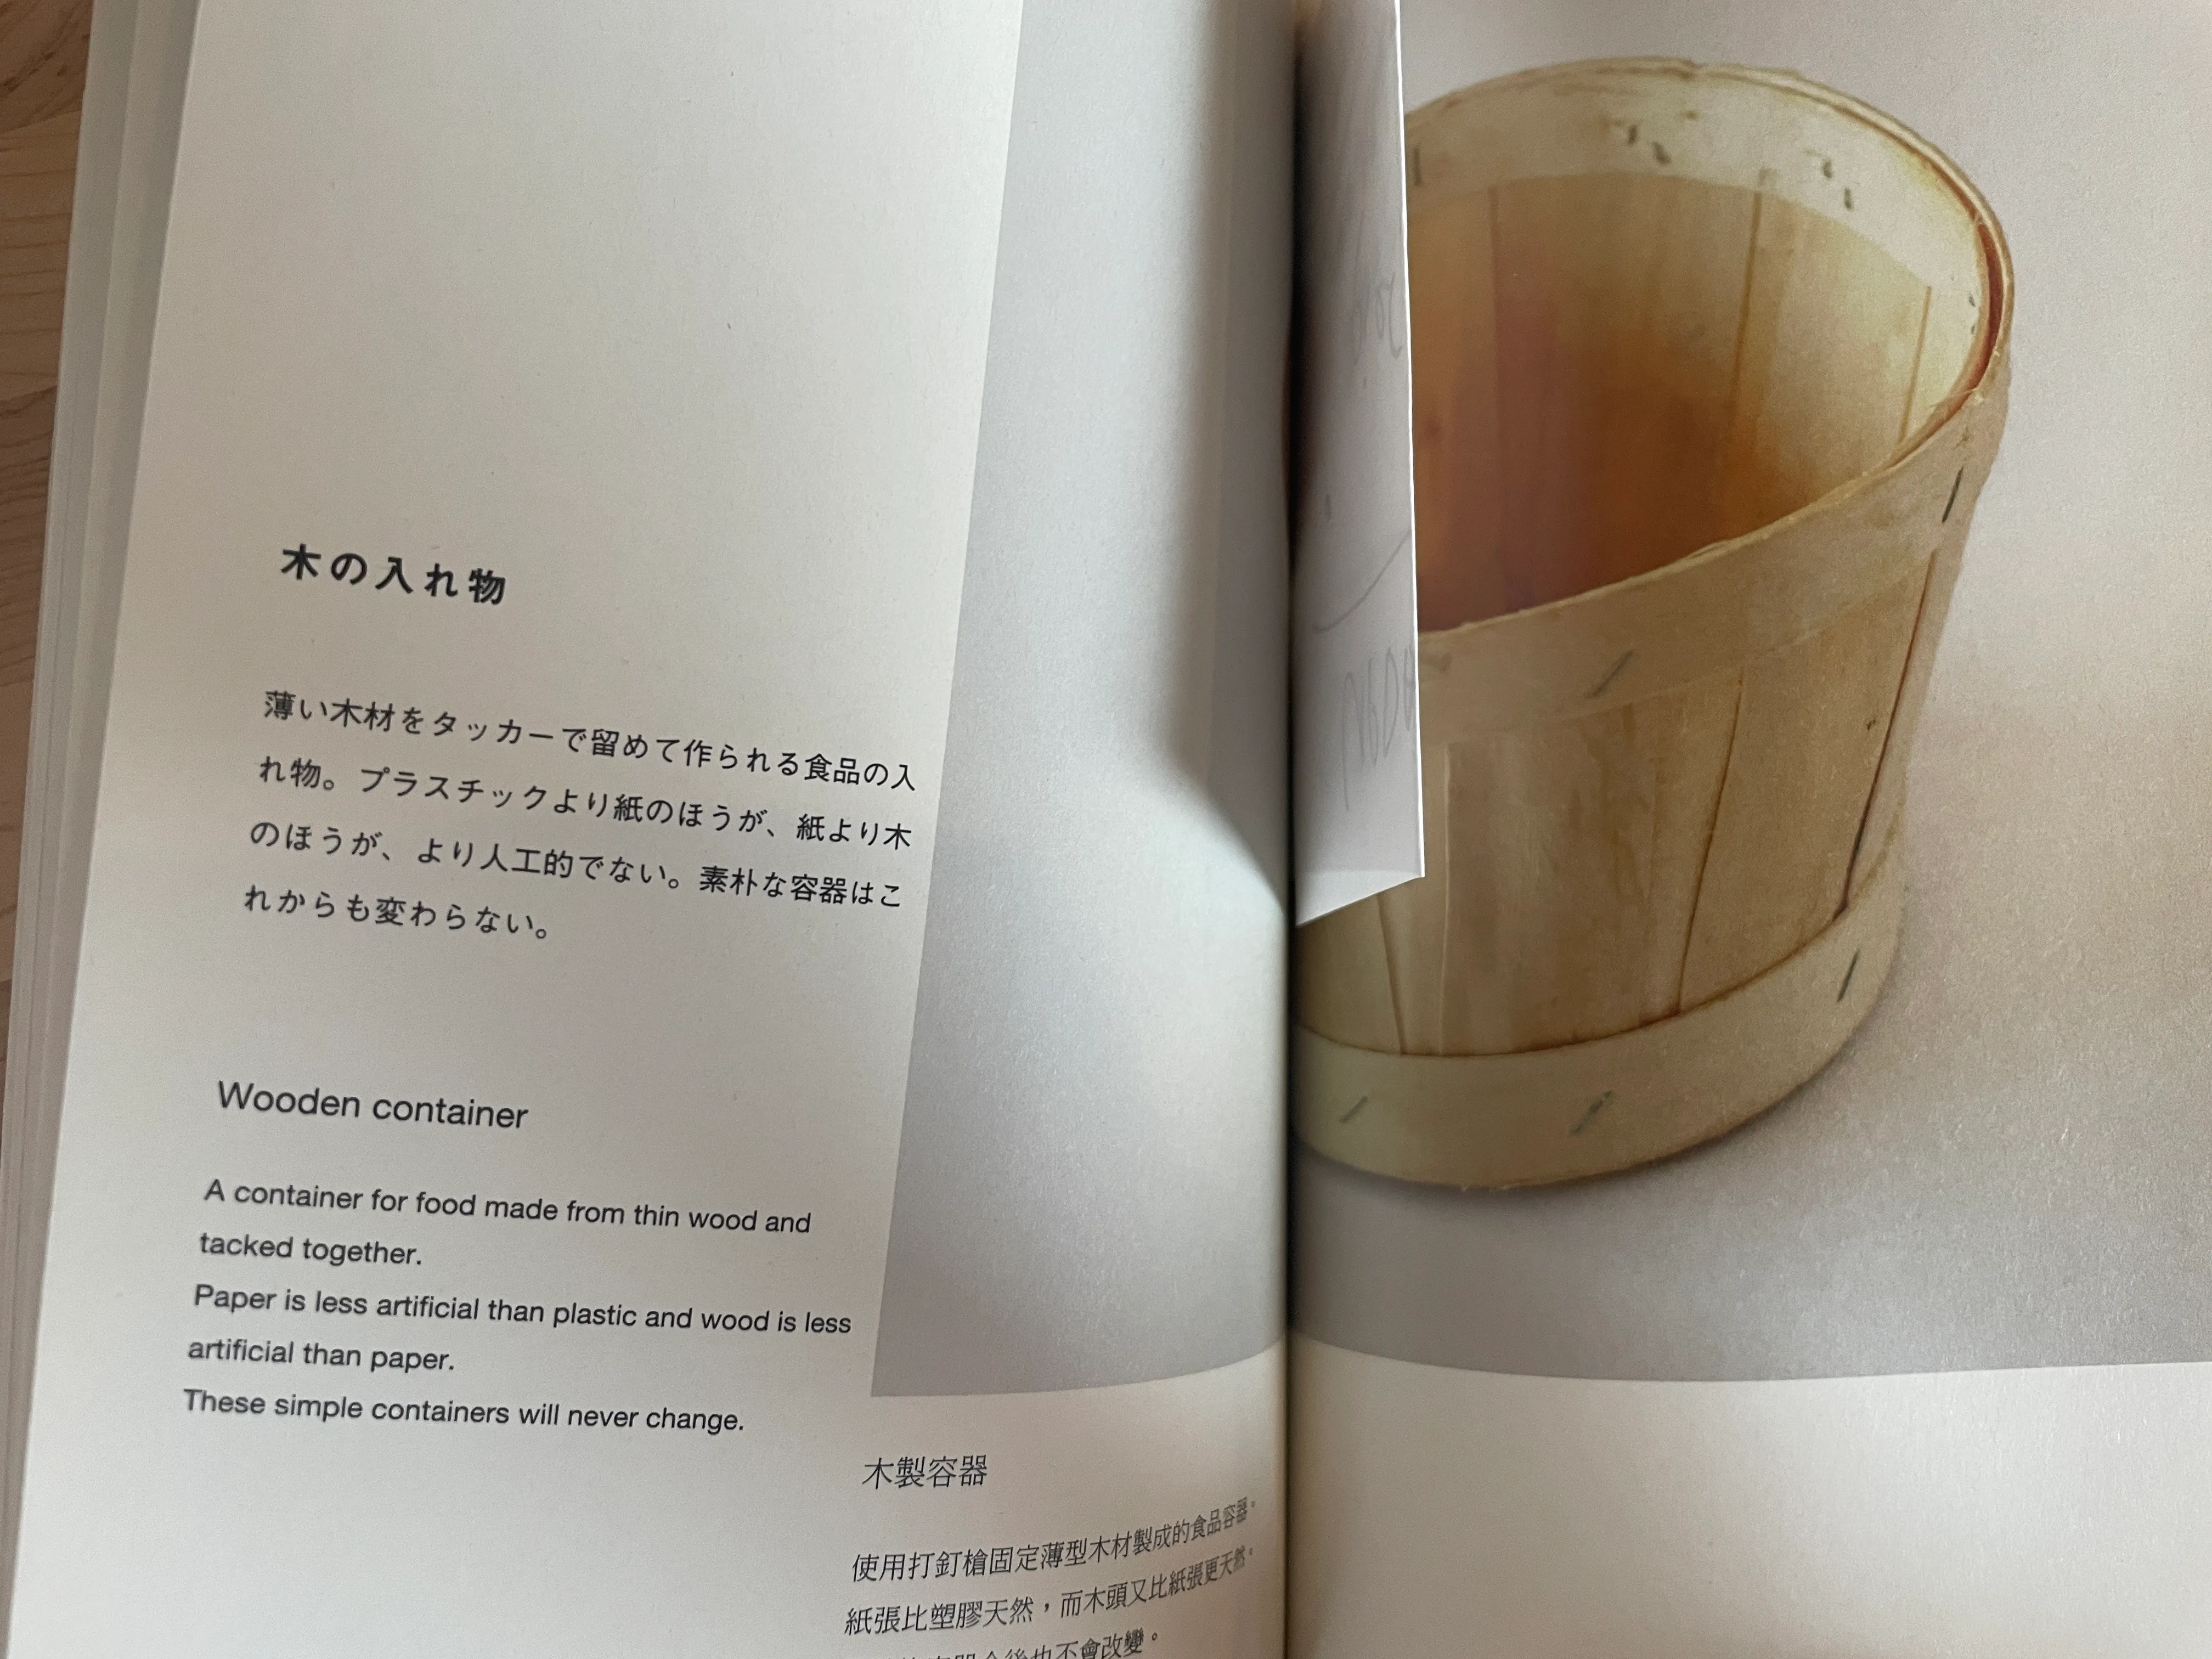 A photograph of favorite moment from Found Muji. A wooden container made of thin wood tacked together.